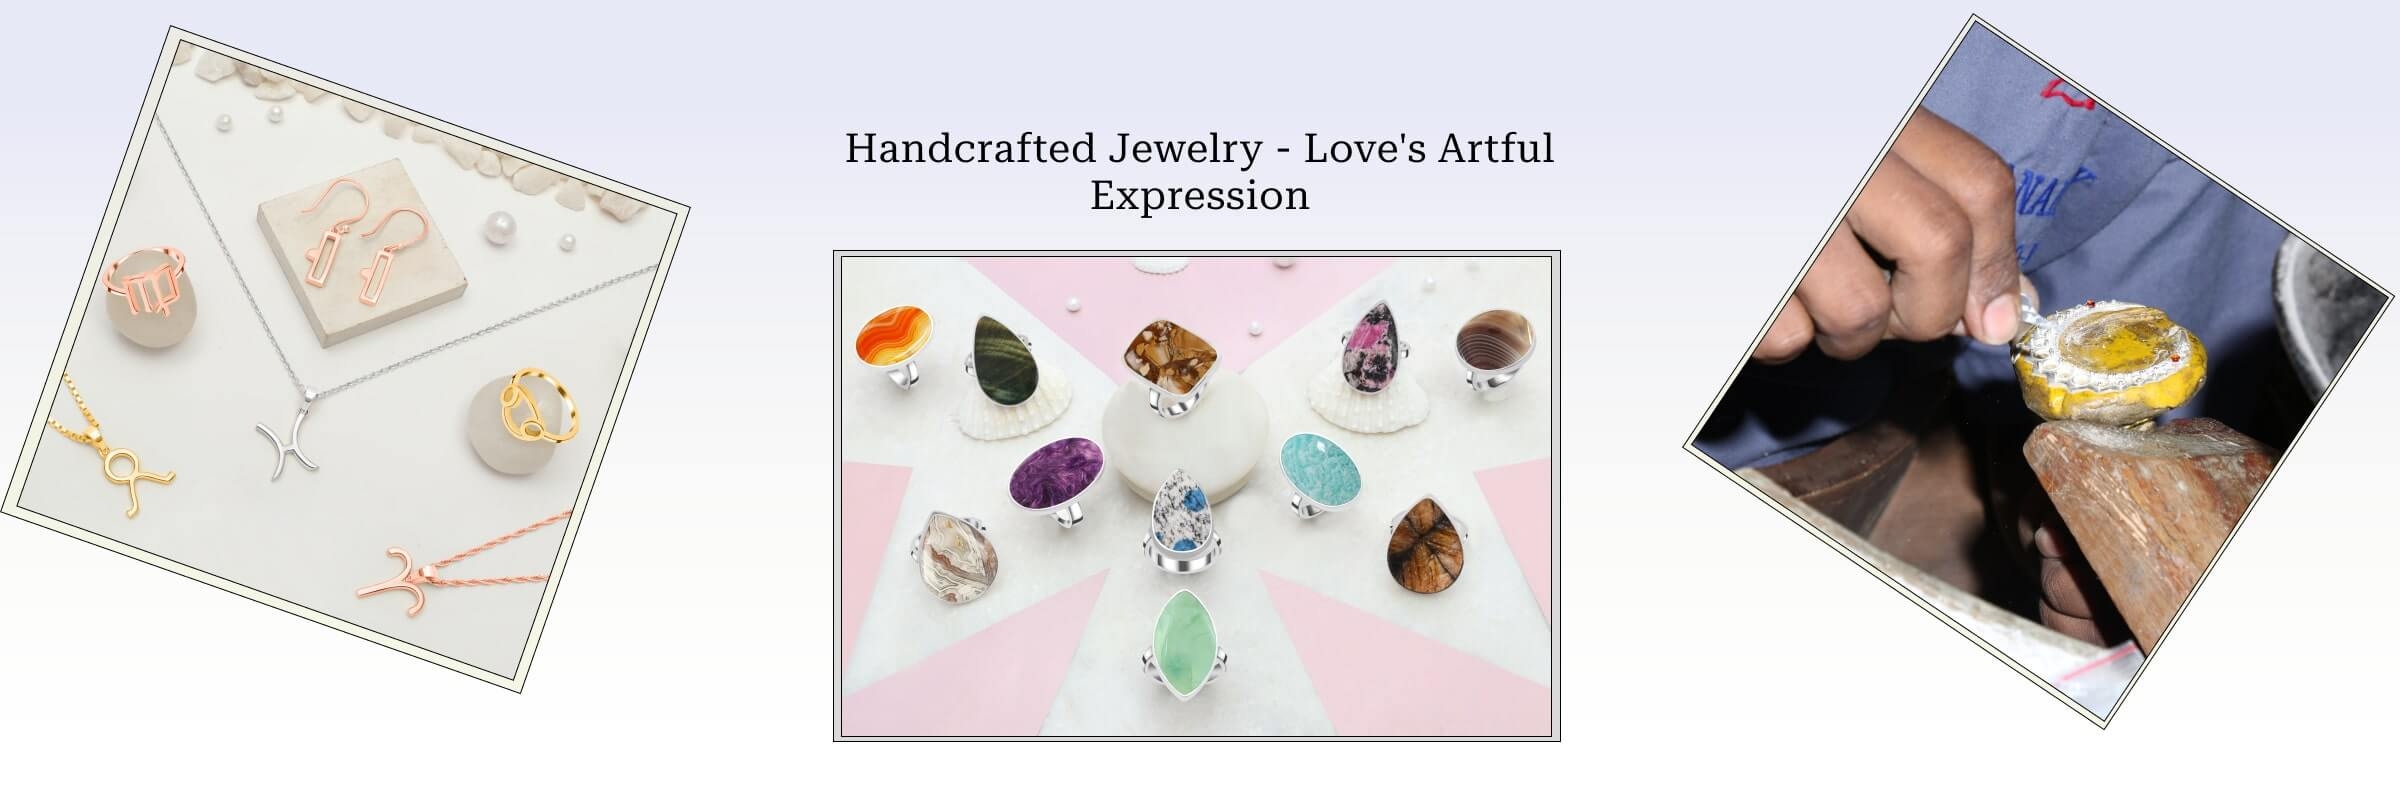 Handcrafted Jewelry - A Unique Gesture of Love